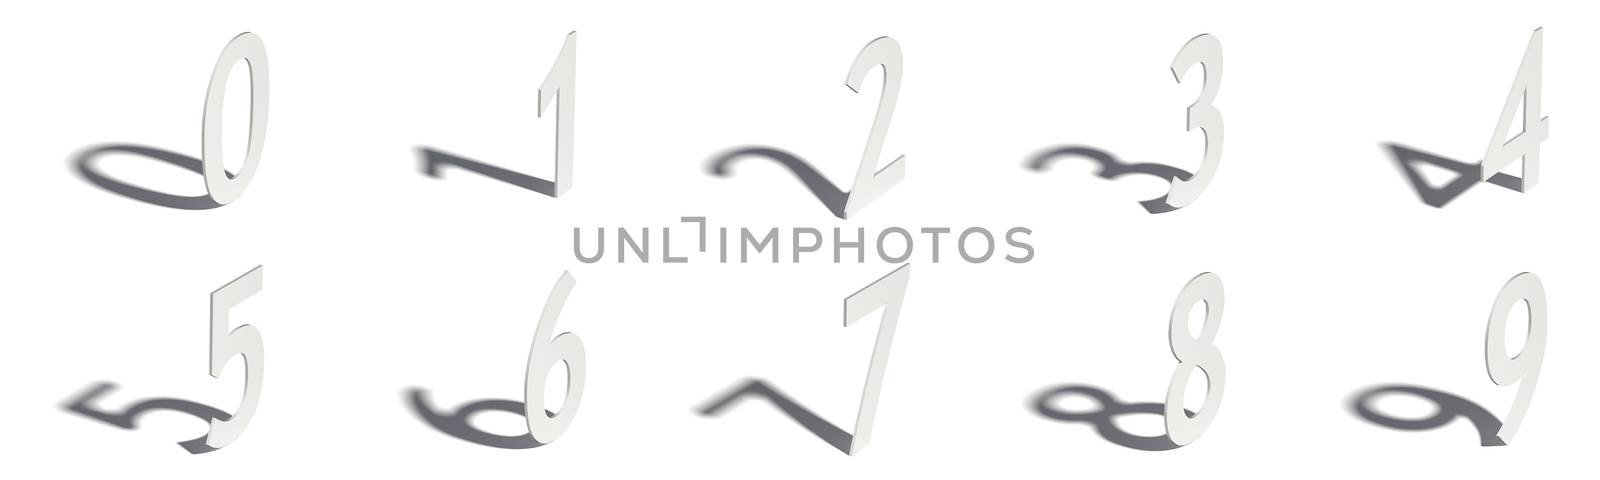 Drop shadow digit Numbers 0-9 3D render illustration isolated on white background